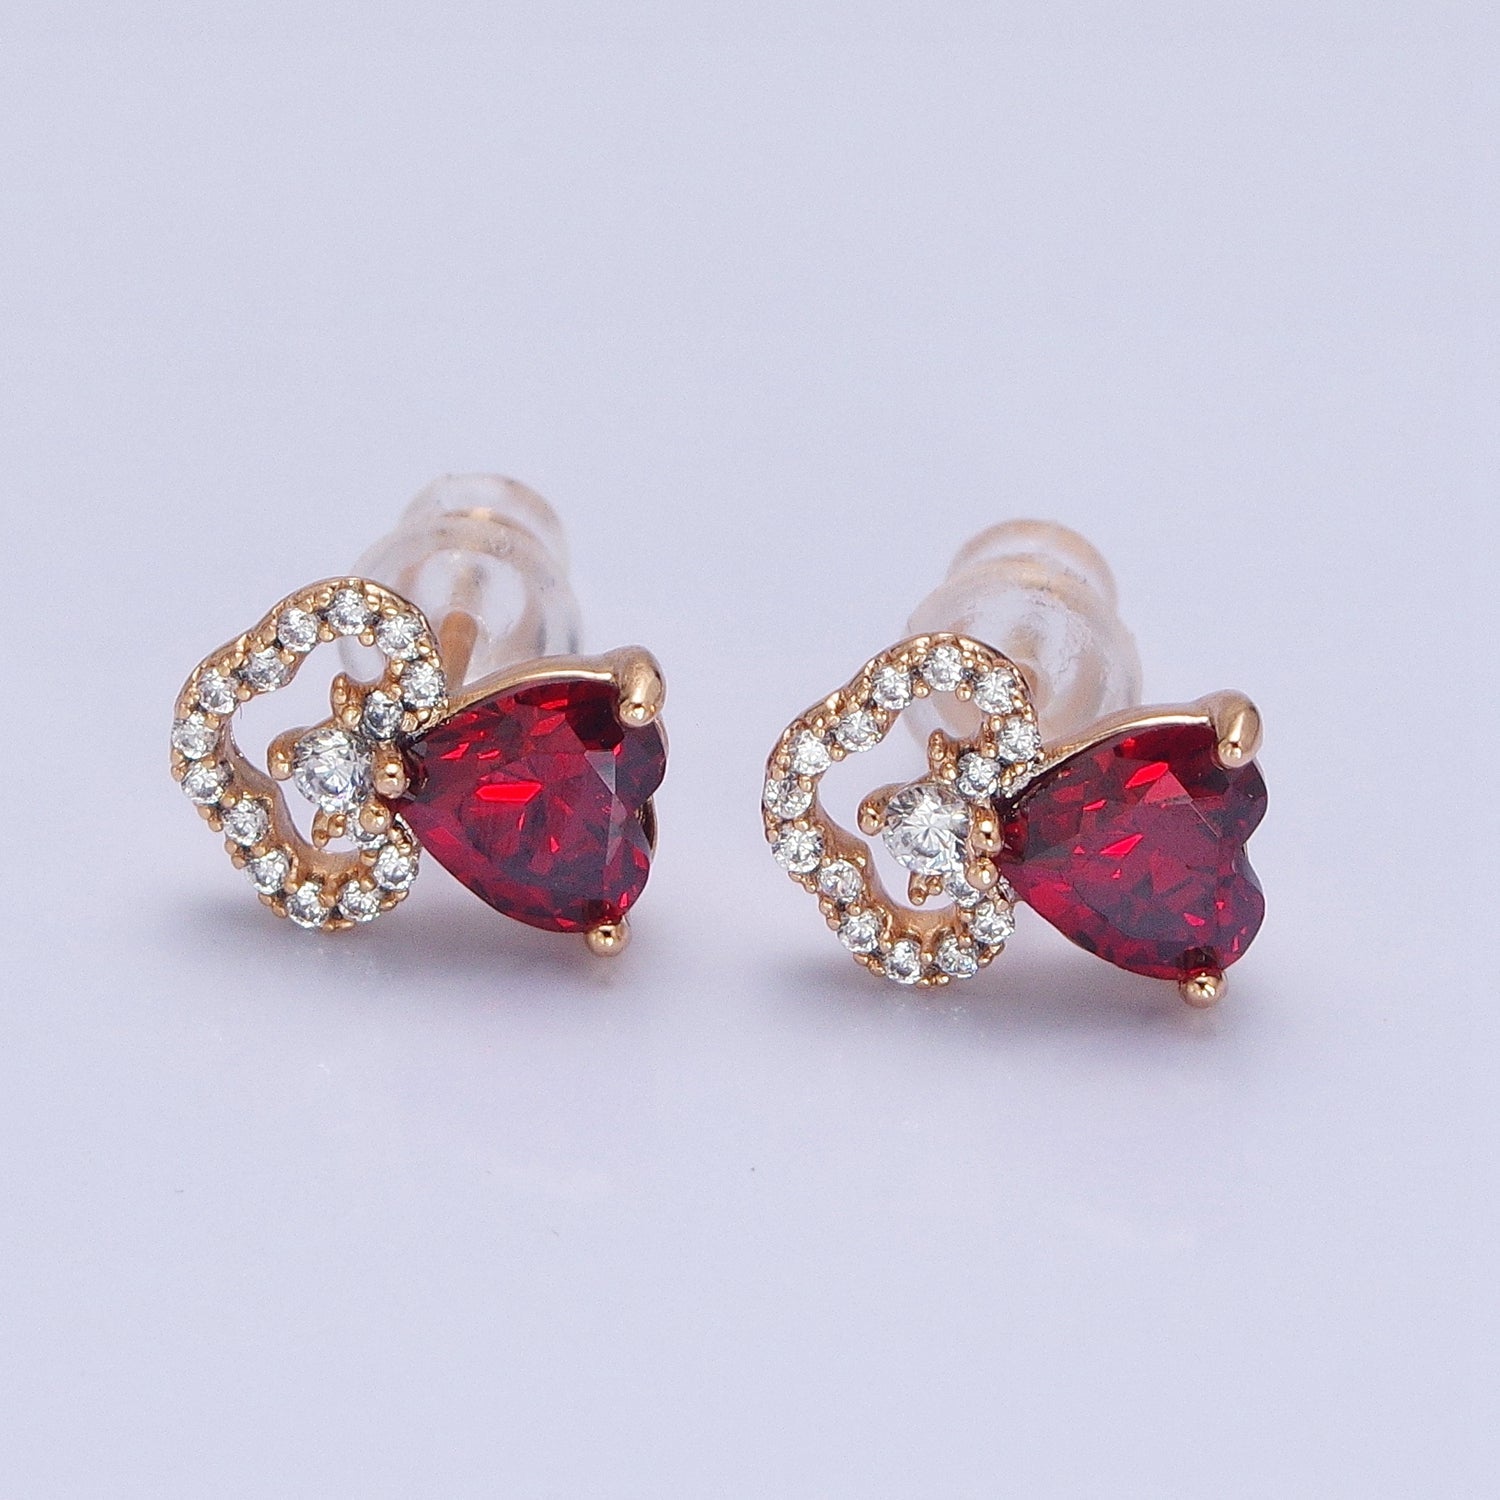 18K Gold Filled Clear, Heart, Red CZ Cloudy Stud Earrings | AD1417 - AD1419